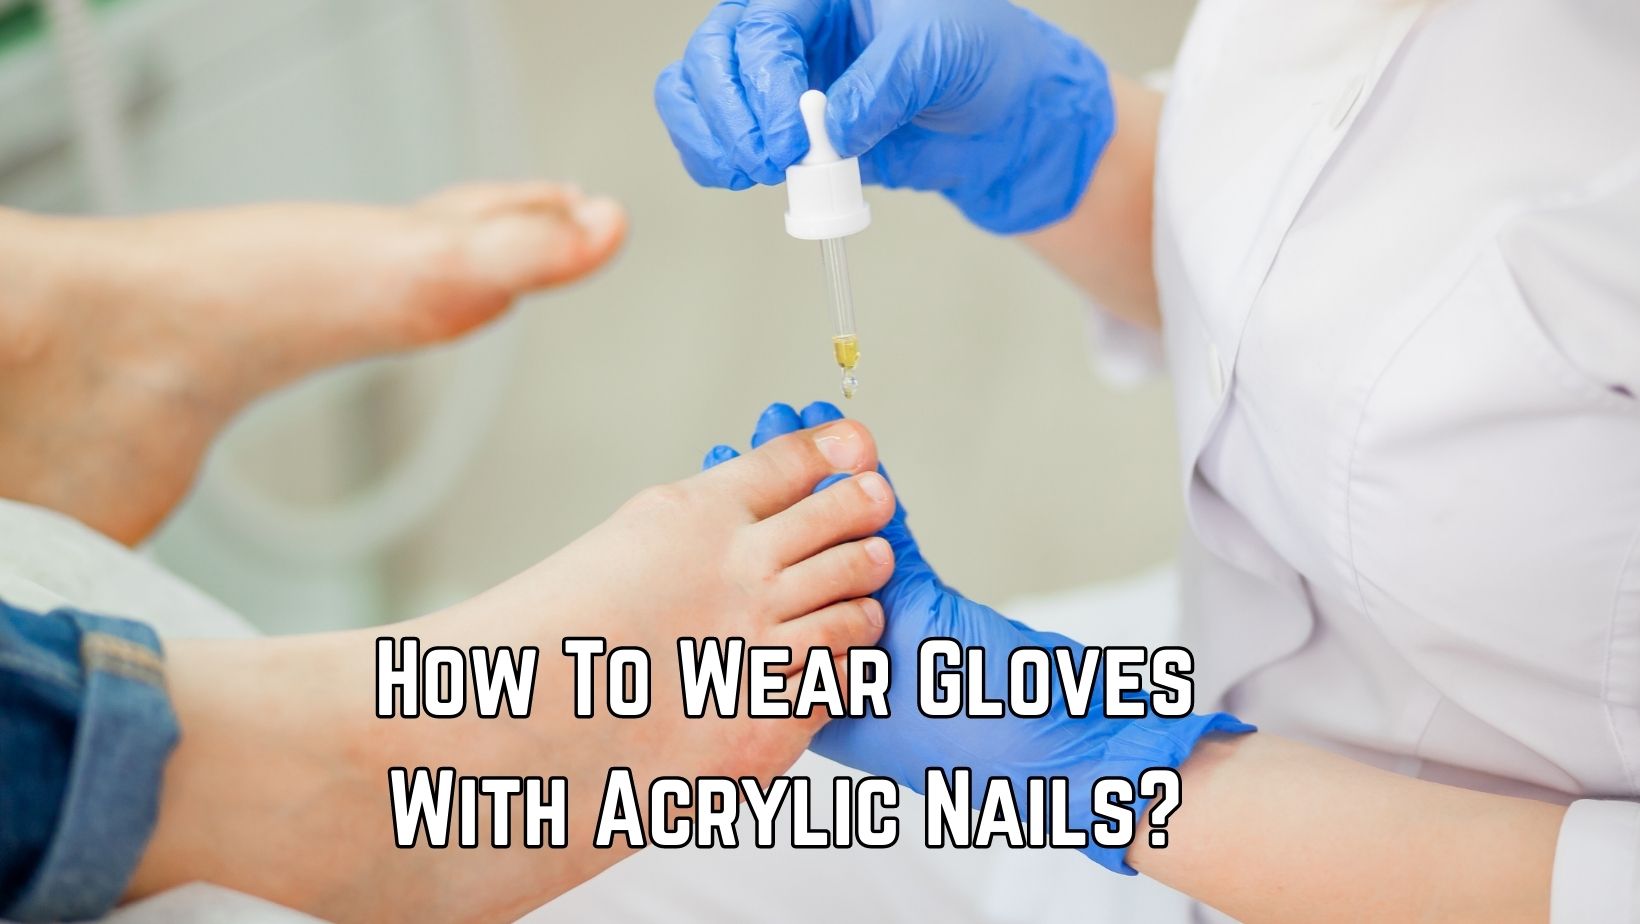 How To Wear Gloves With Acrylic Nails